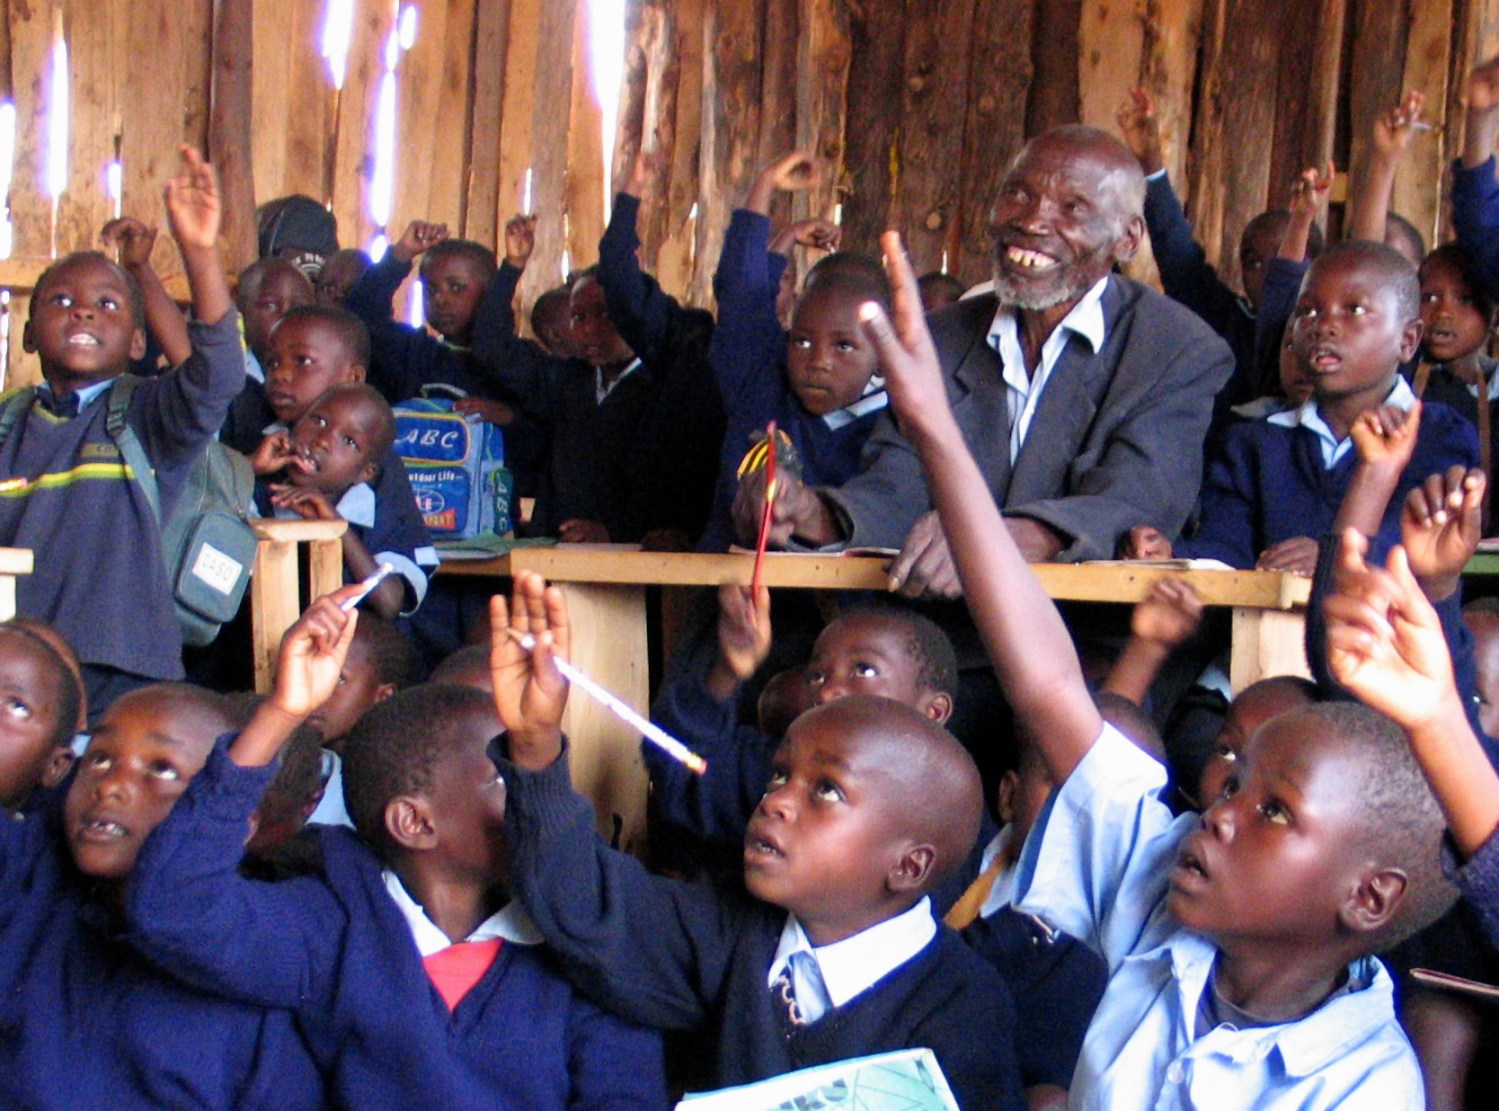 Kimani Murage, an 84-year-old Kenyan grandfather who has 30 grandchildren, attends lessons with classmates January 15, 2004 at a primary school after the government introduced free primary education last year. Murage, who was part of the Mau Mau movement that fought against British colonial rule in Kenya in the 1950s, has classmates whose average age is seven years old, and two of his grandchildren attend more advanced classes in the same school in Kenya's Eldoret district, some 270 km (162 miles) northwest of the capital Nairobi. REUTERS/Beatrice Mategwa  PP04010048 RS/ACM - RP4DRIGLUBAC